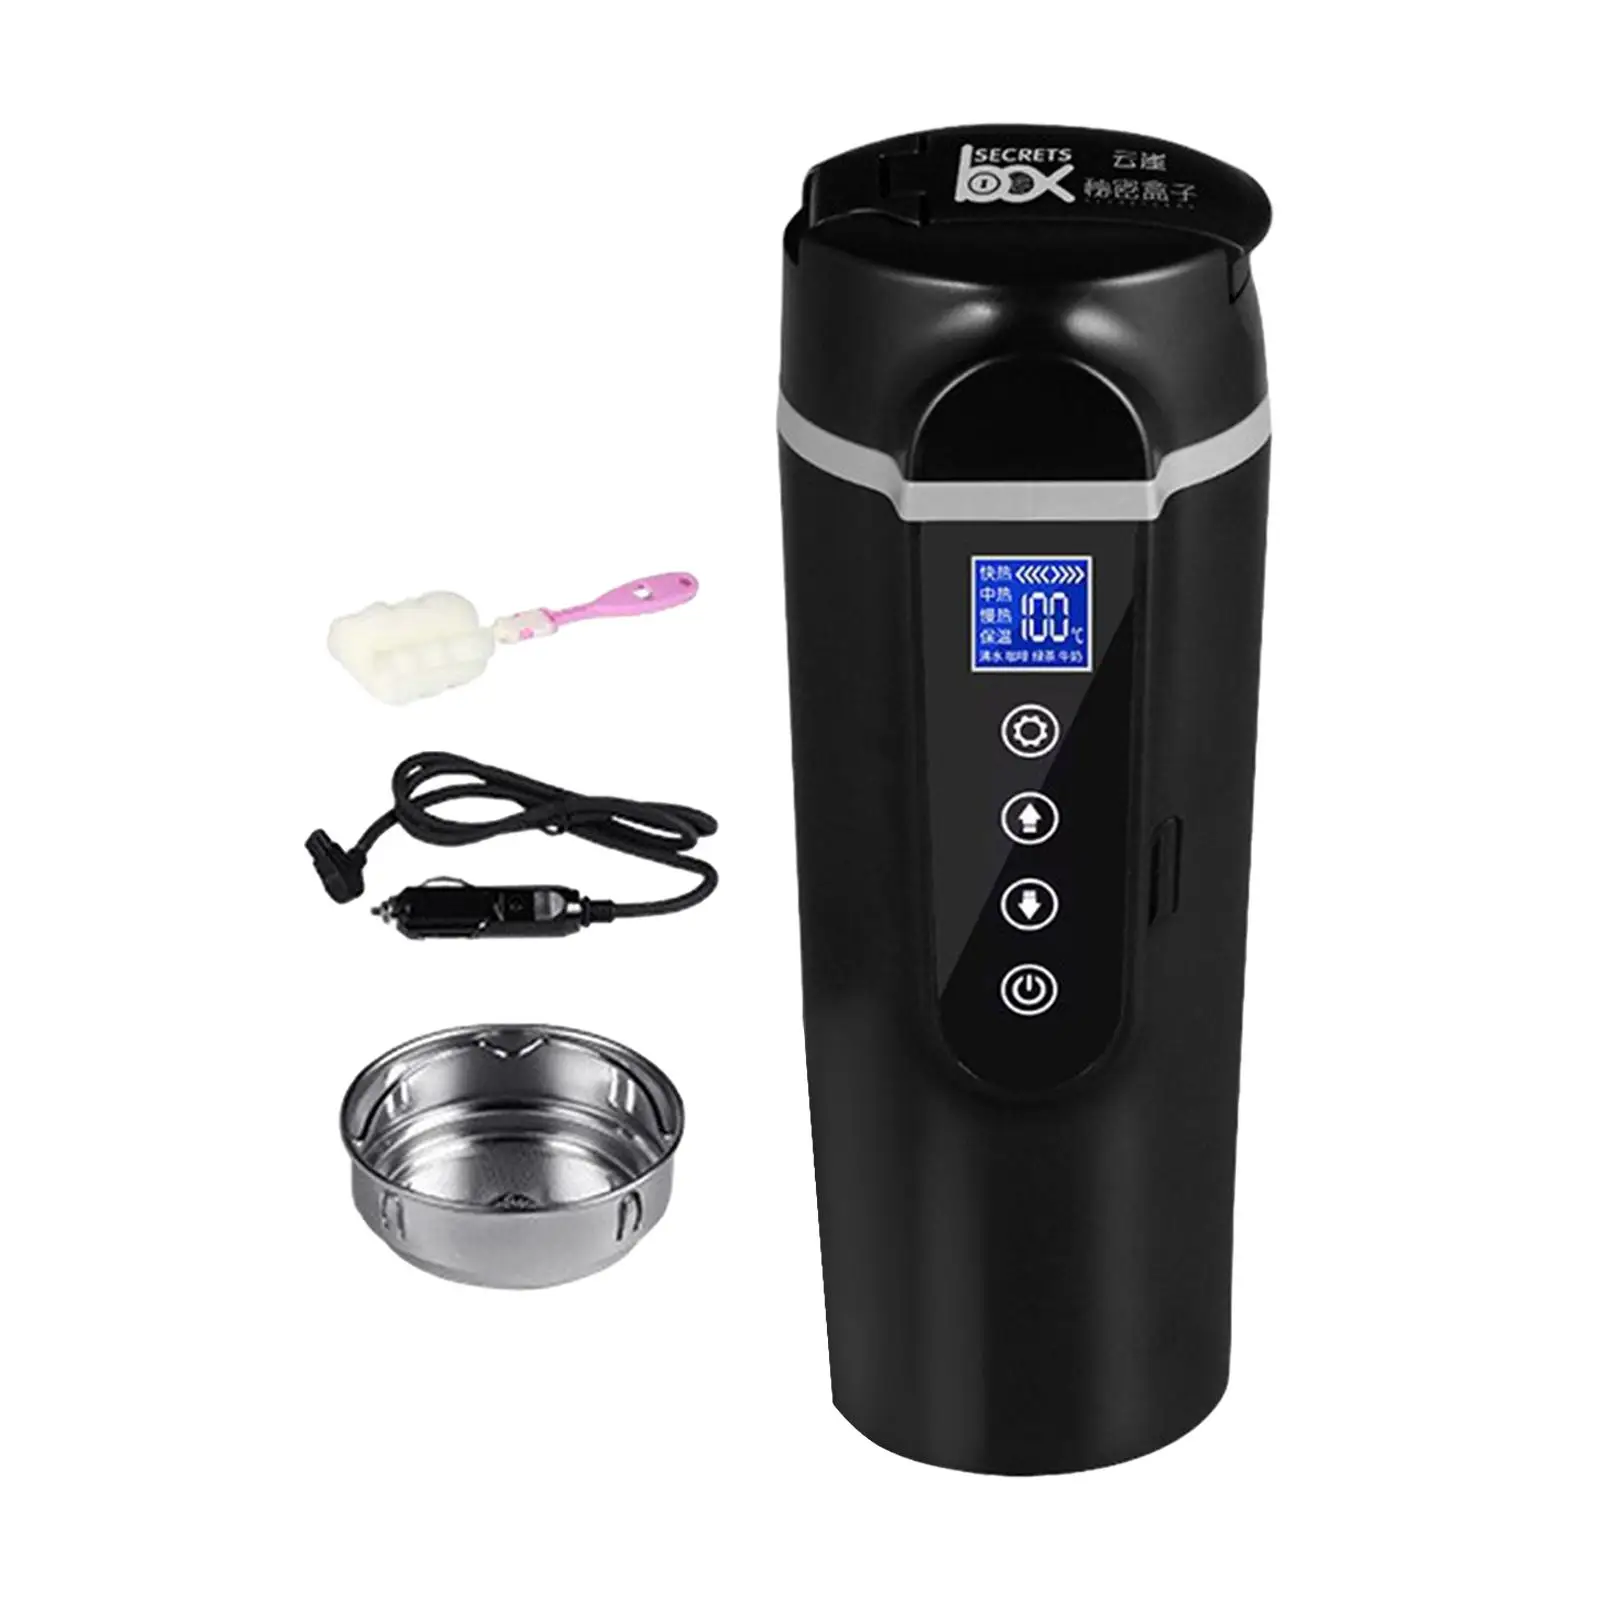 Car Heating Cup Thermal Insulation Water Boiler Quick Heating Variable Temp Control LED Display Travel Coffee Mug for Auto Car